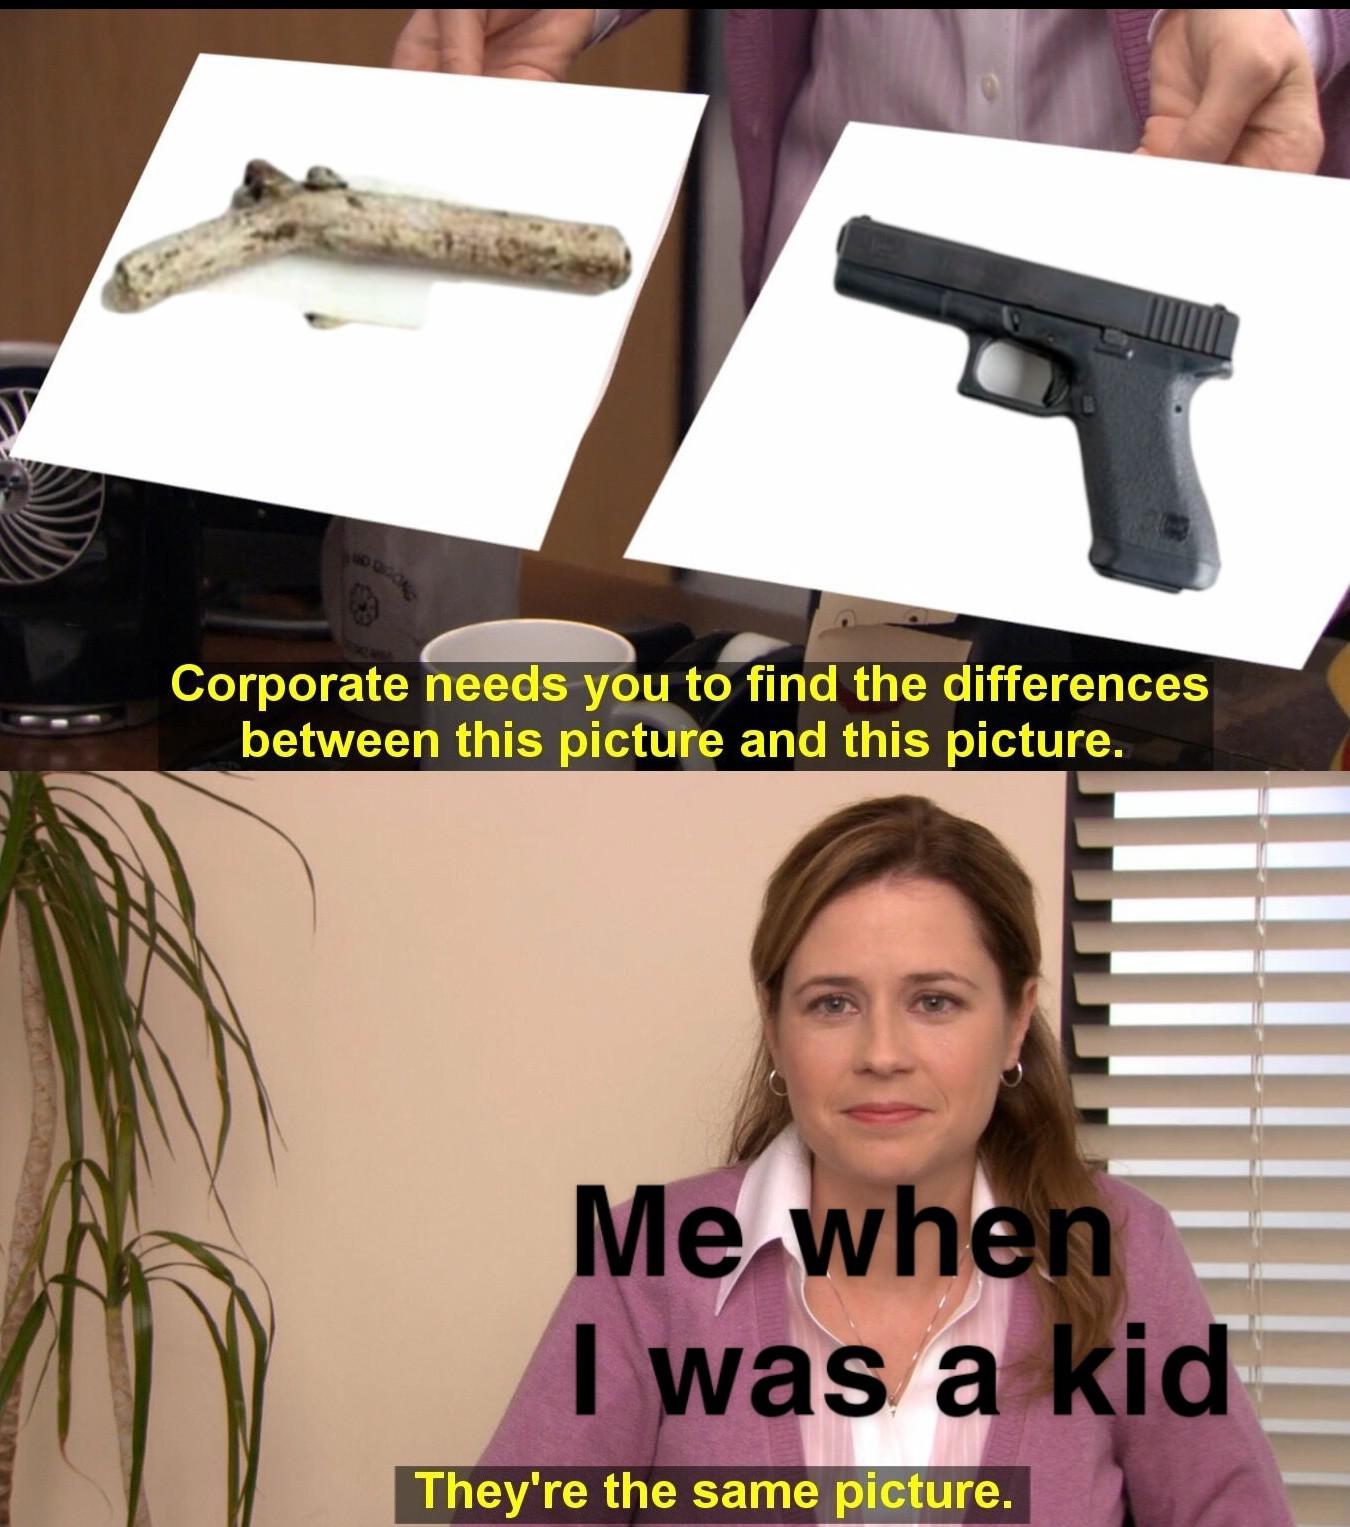 Funny, Hmmm, Glock, USA, Pam, Cops other memes Funny, Hmmm, Glock, USA, Pam, Cops text: Corporate needs you to find the differences between this picture and this picture. Menwheh I y,tas/a kid They're the same picture. 